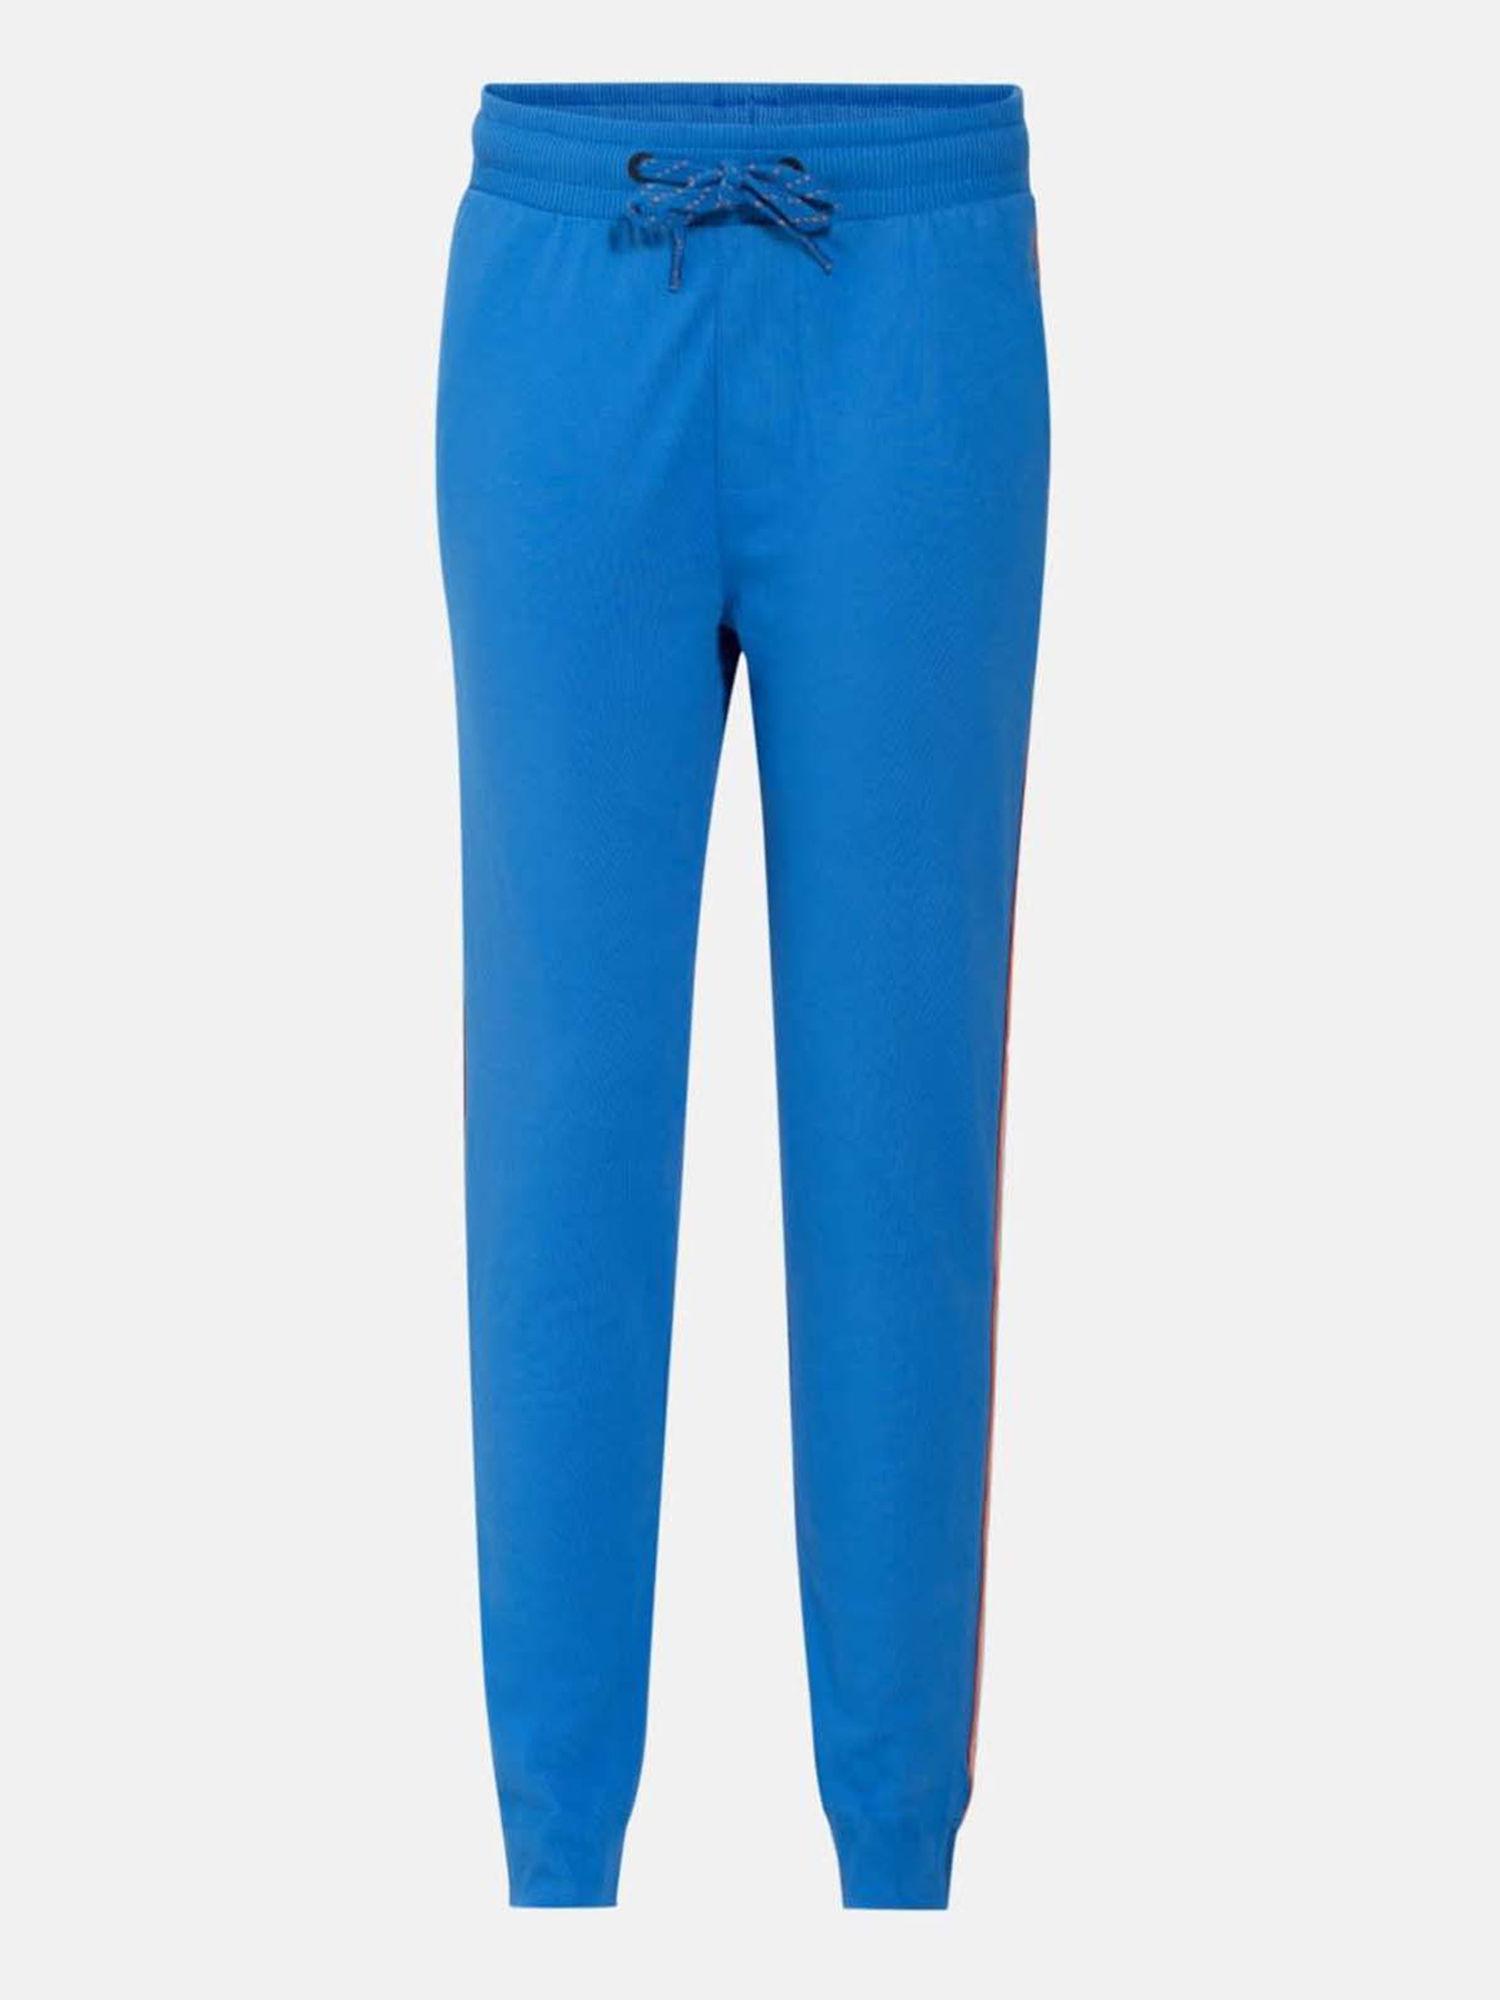 palace-blue-track-pant---style-number---(ab31)